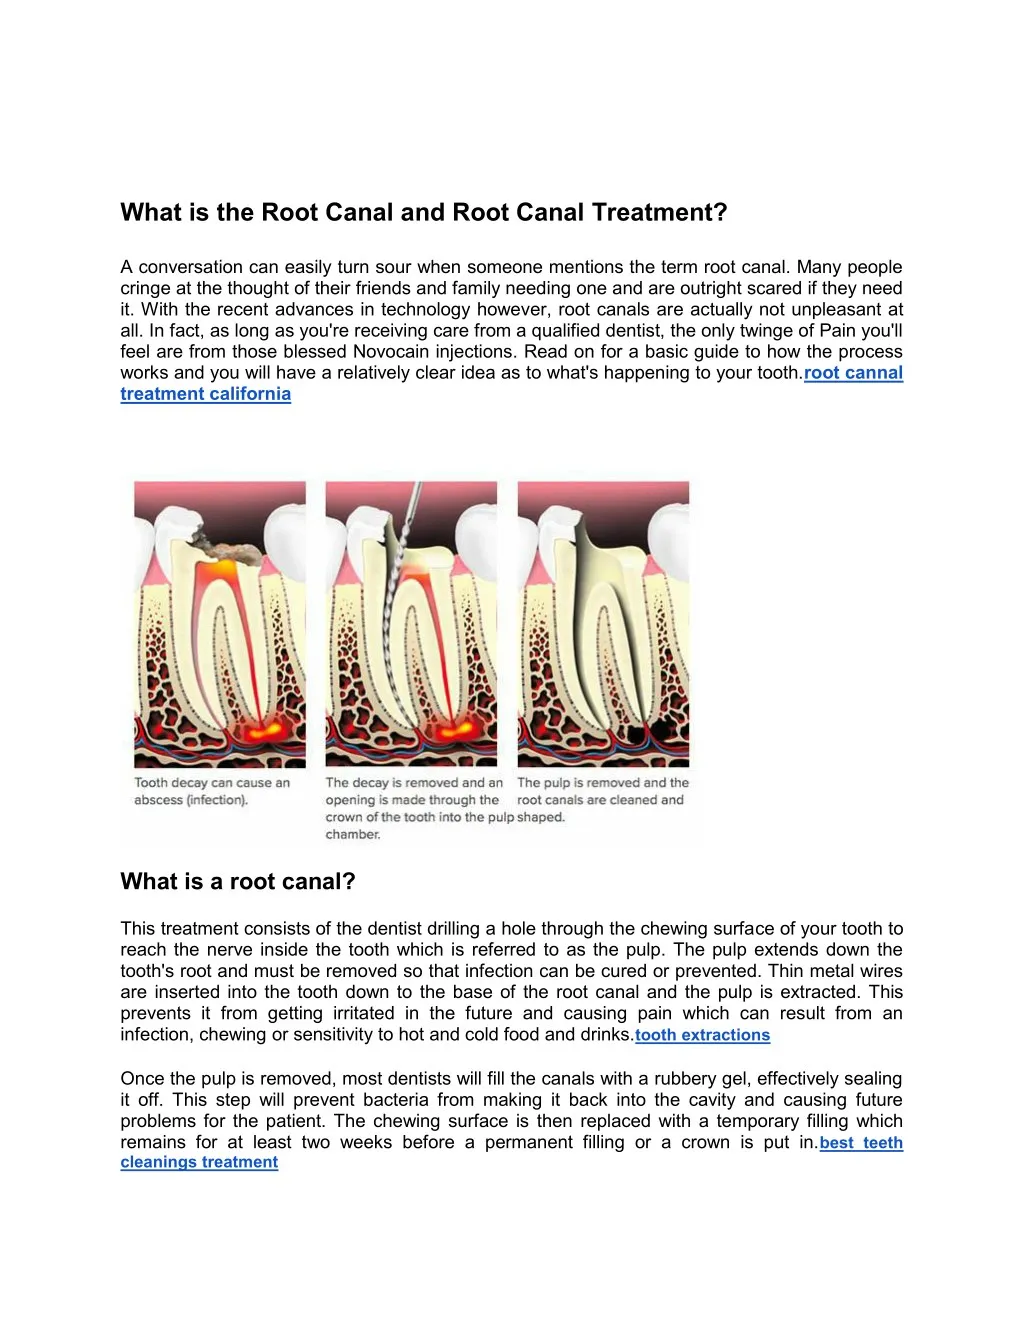 what is the root canal and root canal treatment